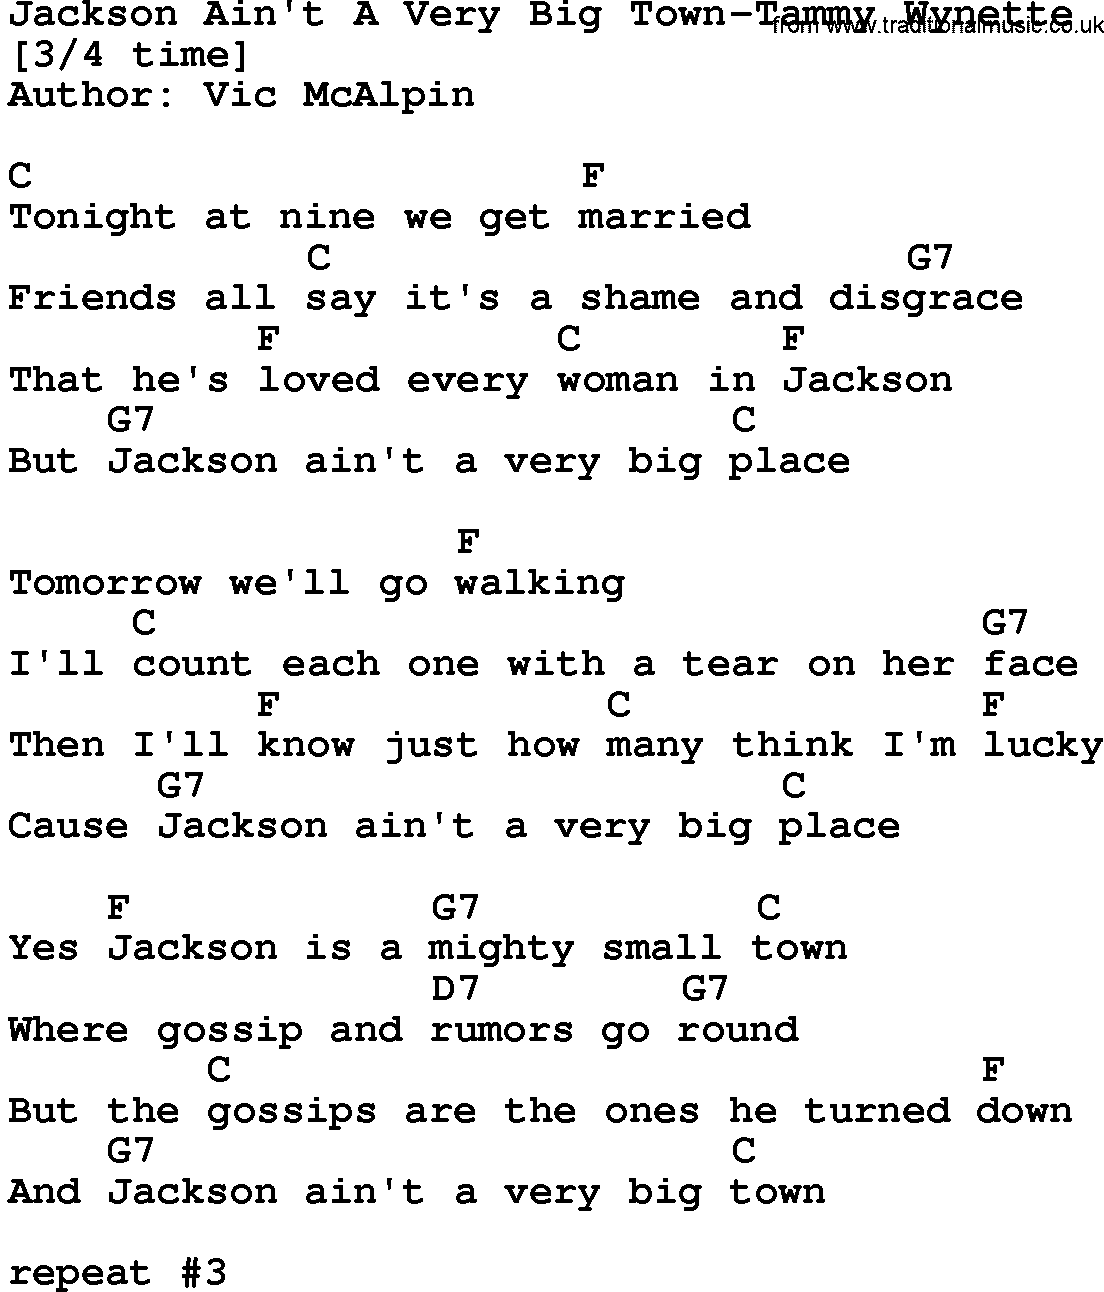 Country music song: Jackson Ain't A Very Big Town-Tammy Wynette lyrics and chords